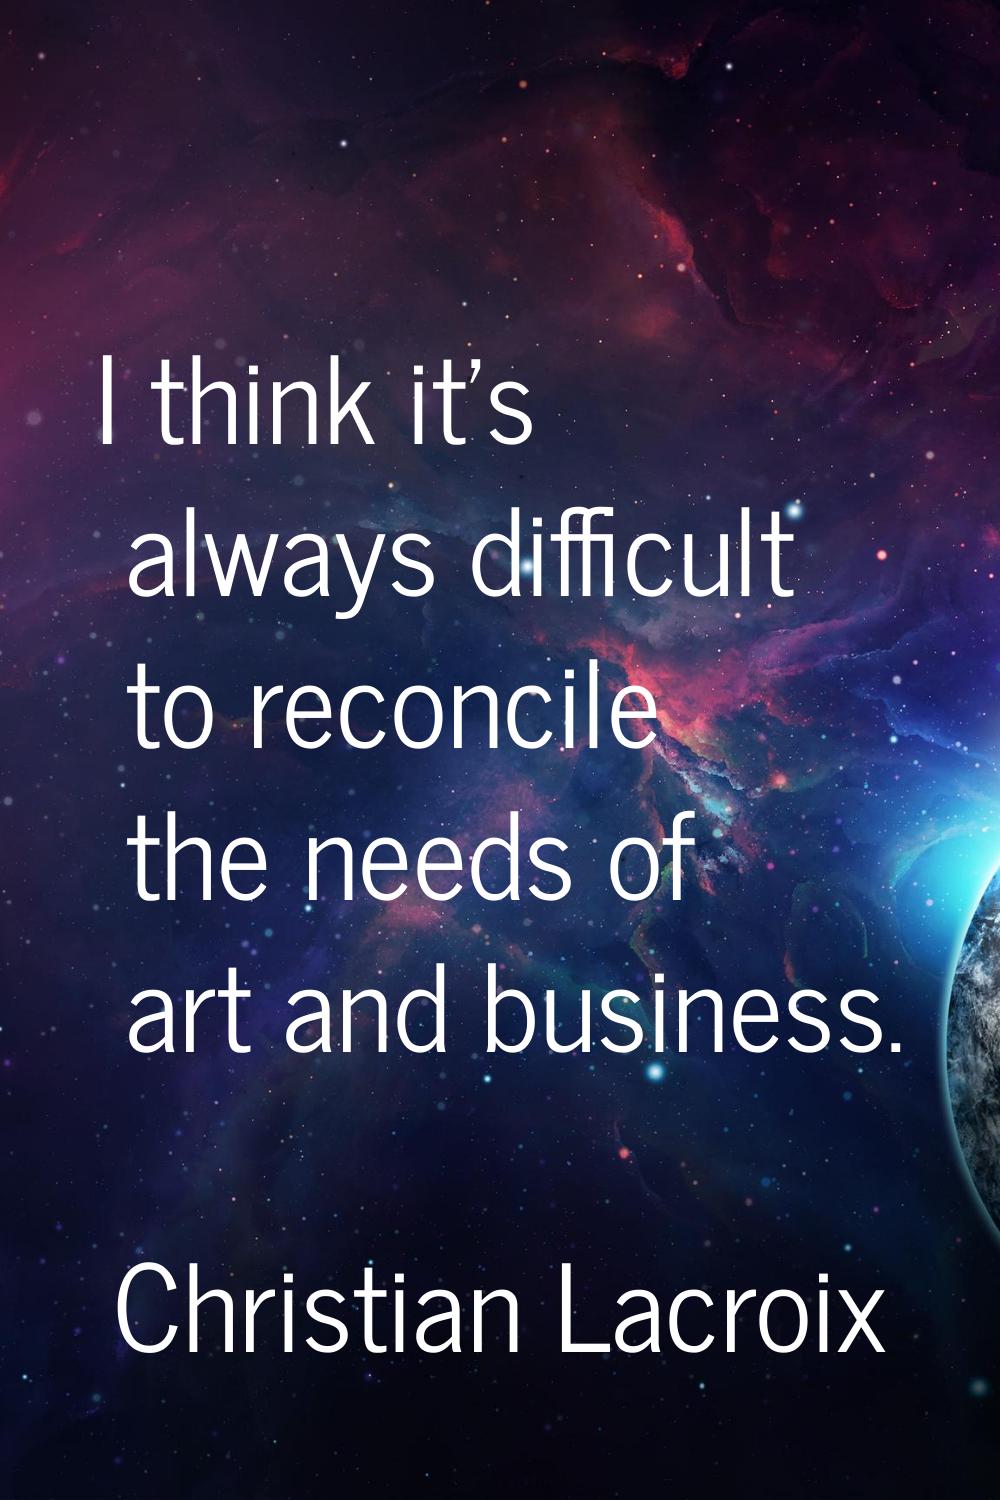 I think it's always difficult to reconcile the needs of art and business.